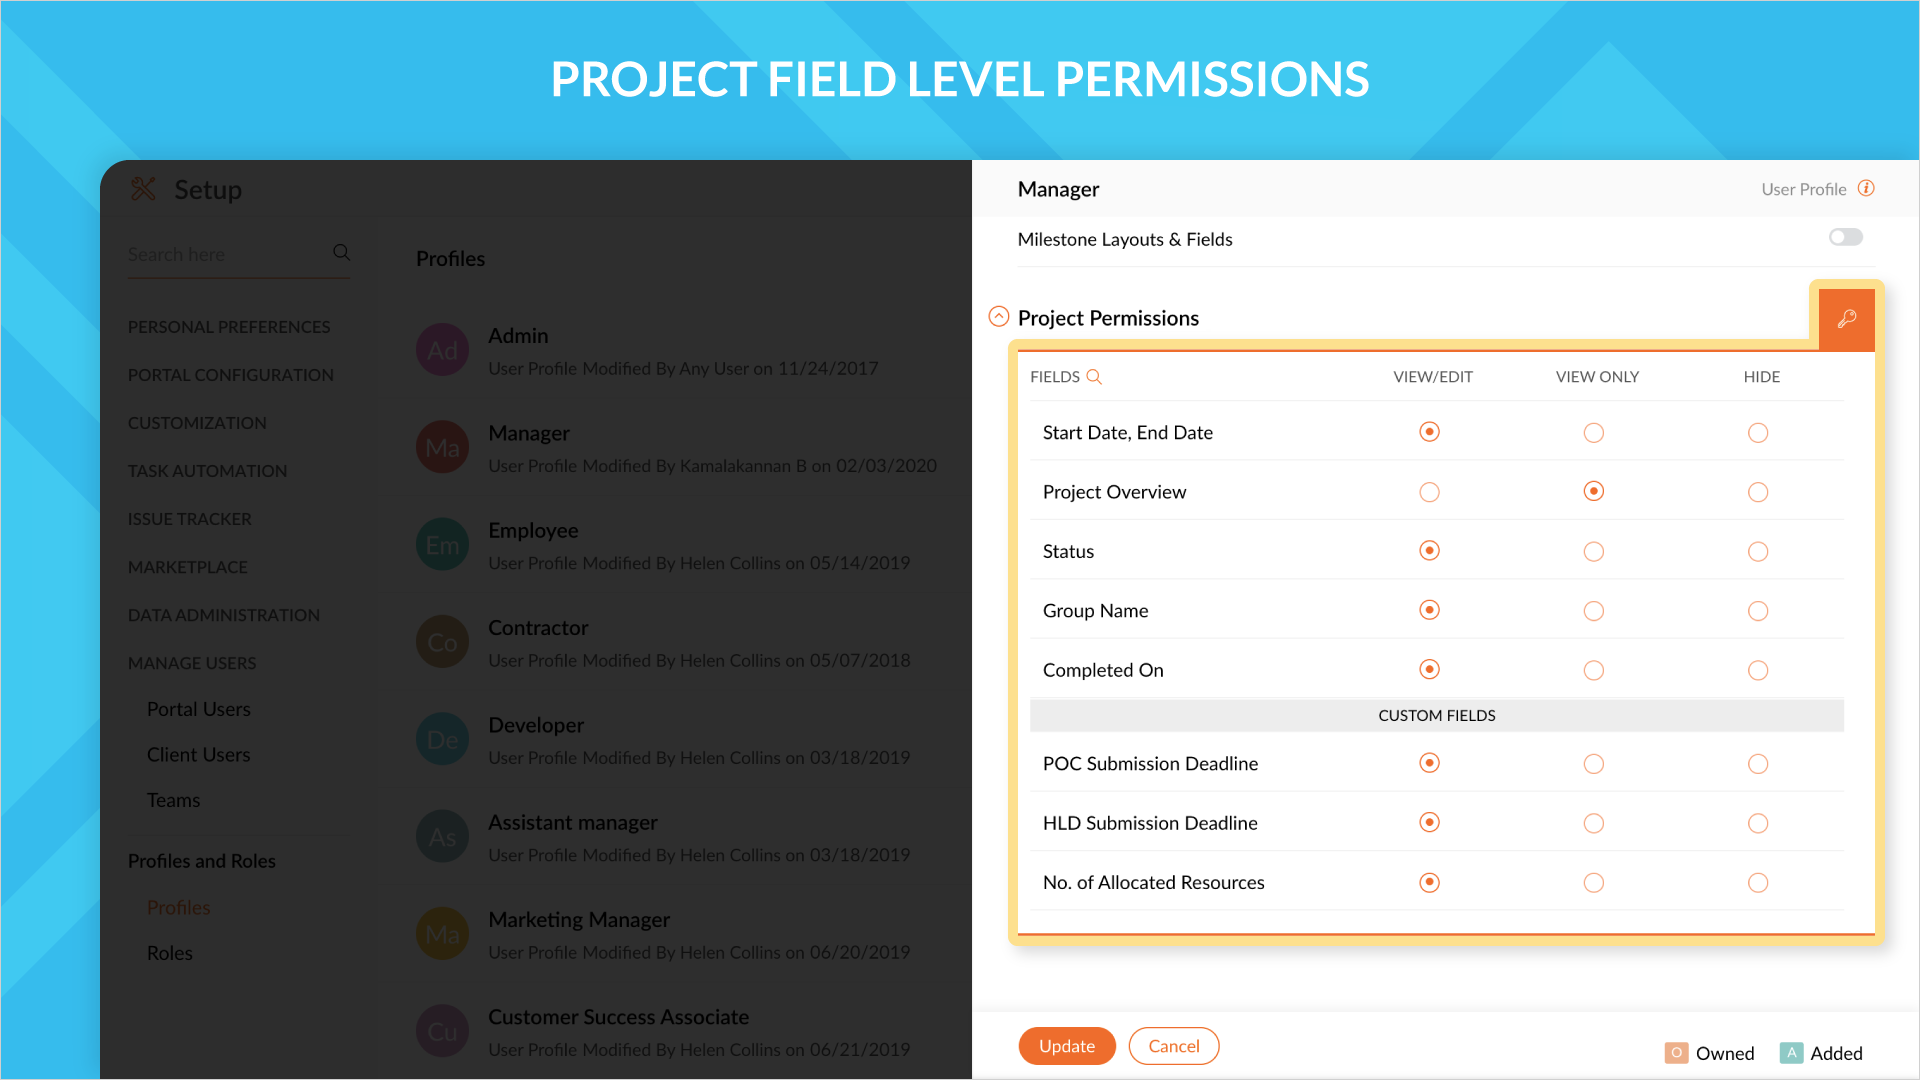 Project Field Level Permissions